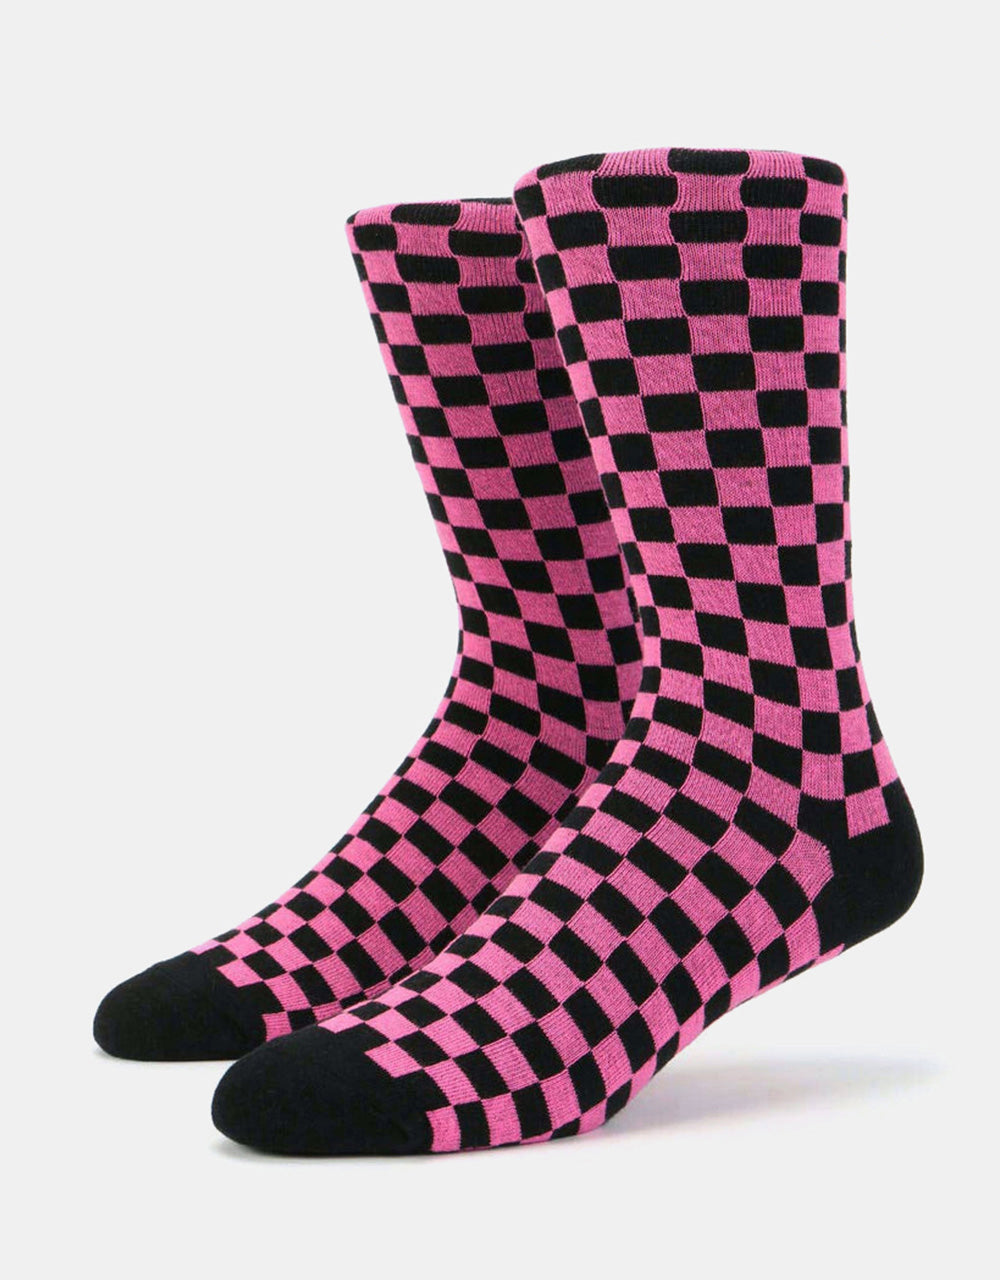 Route One Chequered Socks - Black/Pink